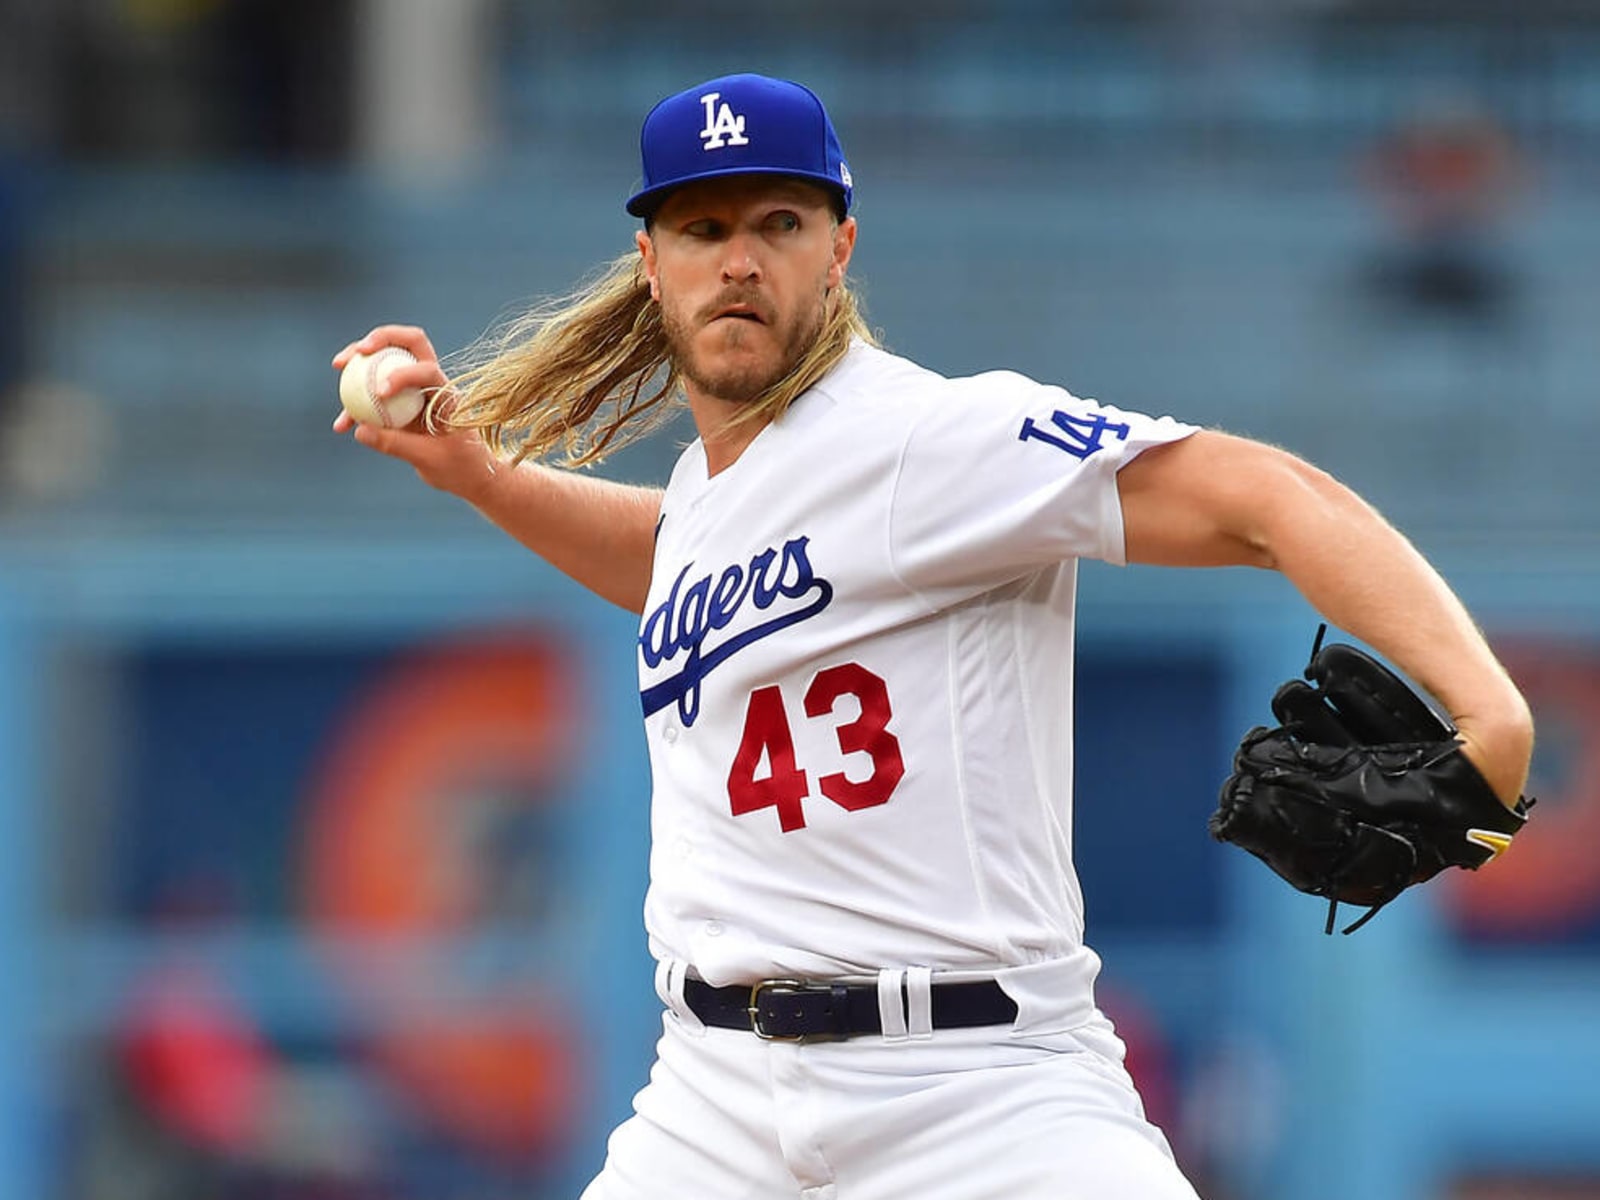 Dodgers place pitcher Noah Syndergaard on injured list with no